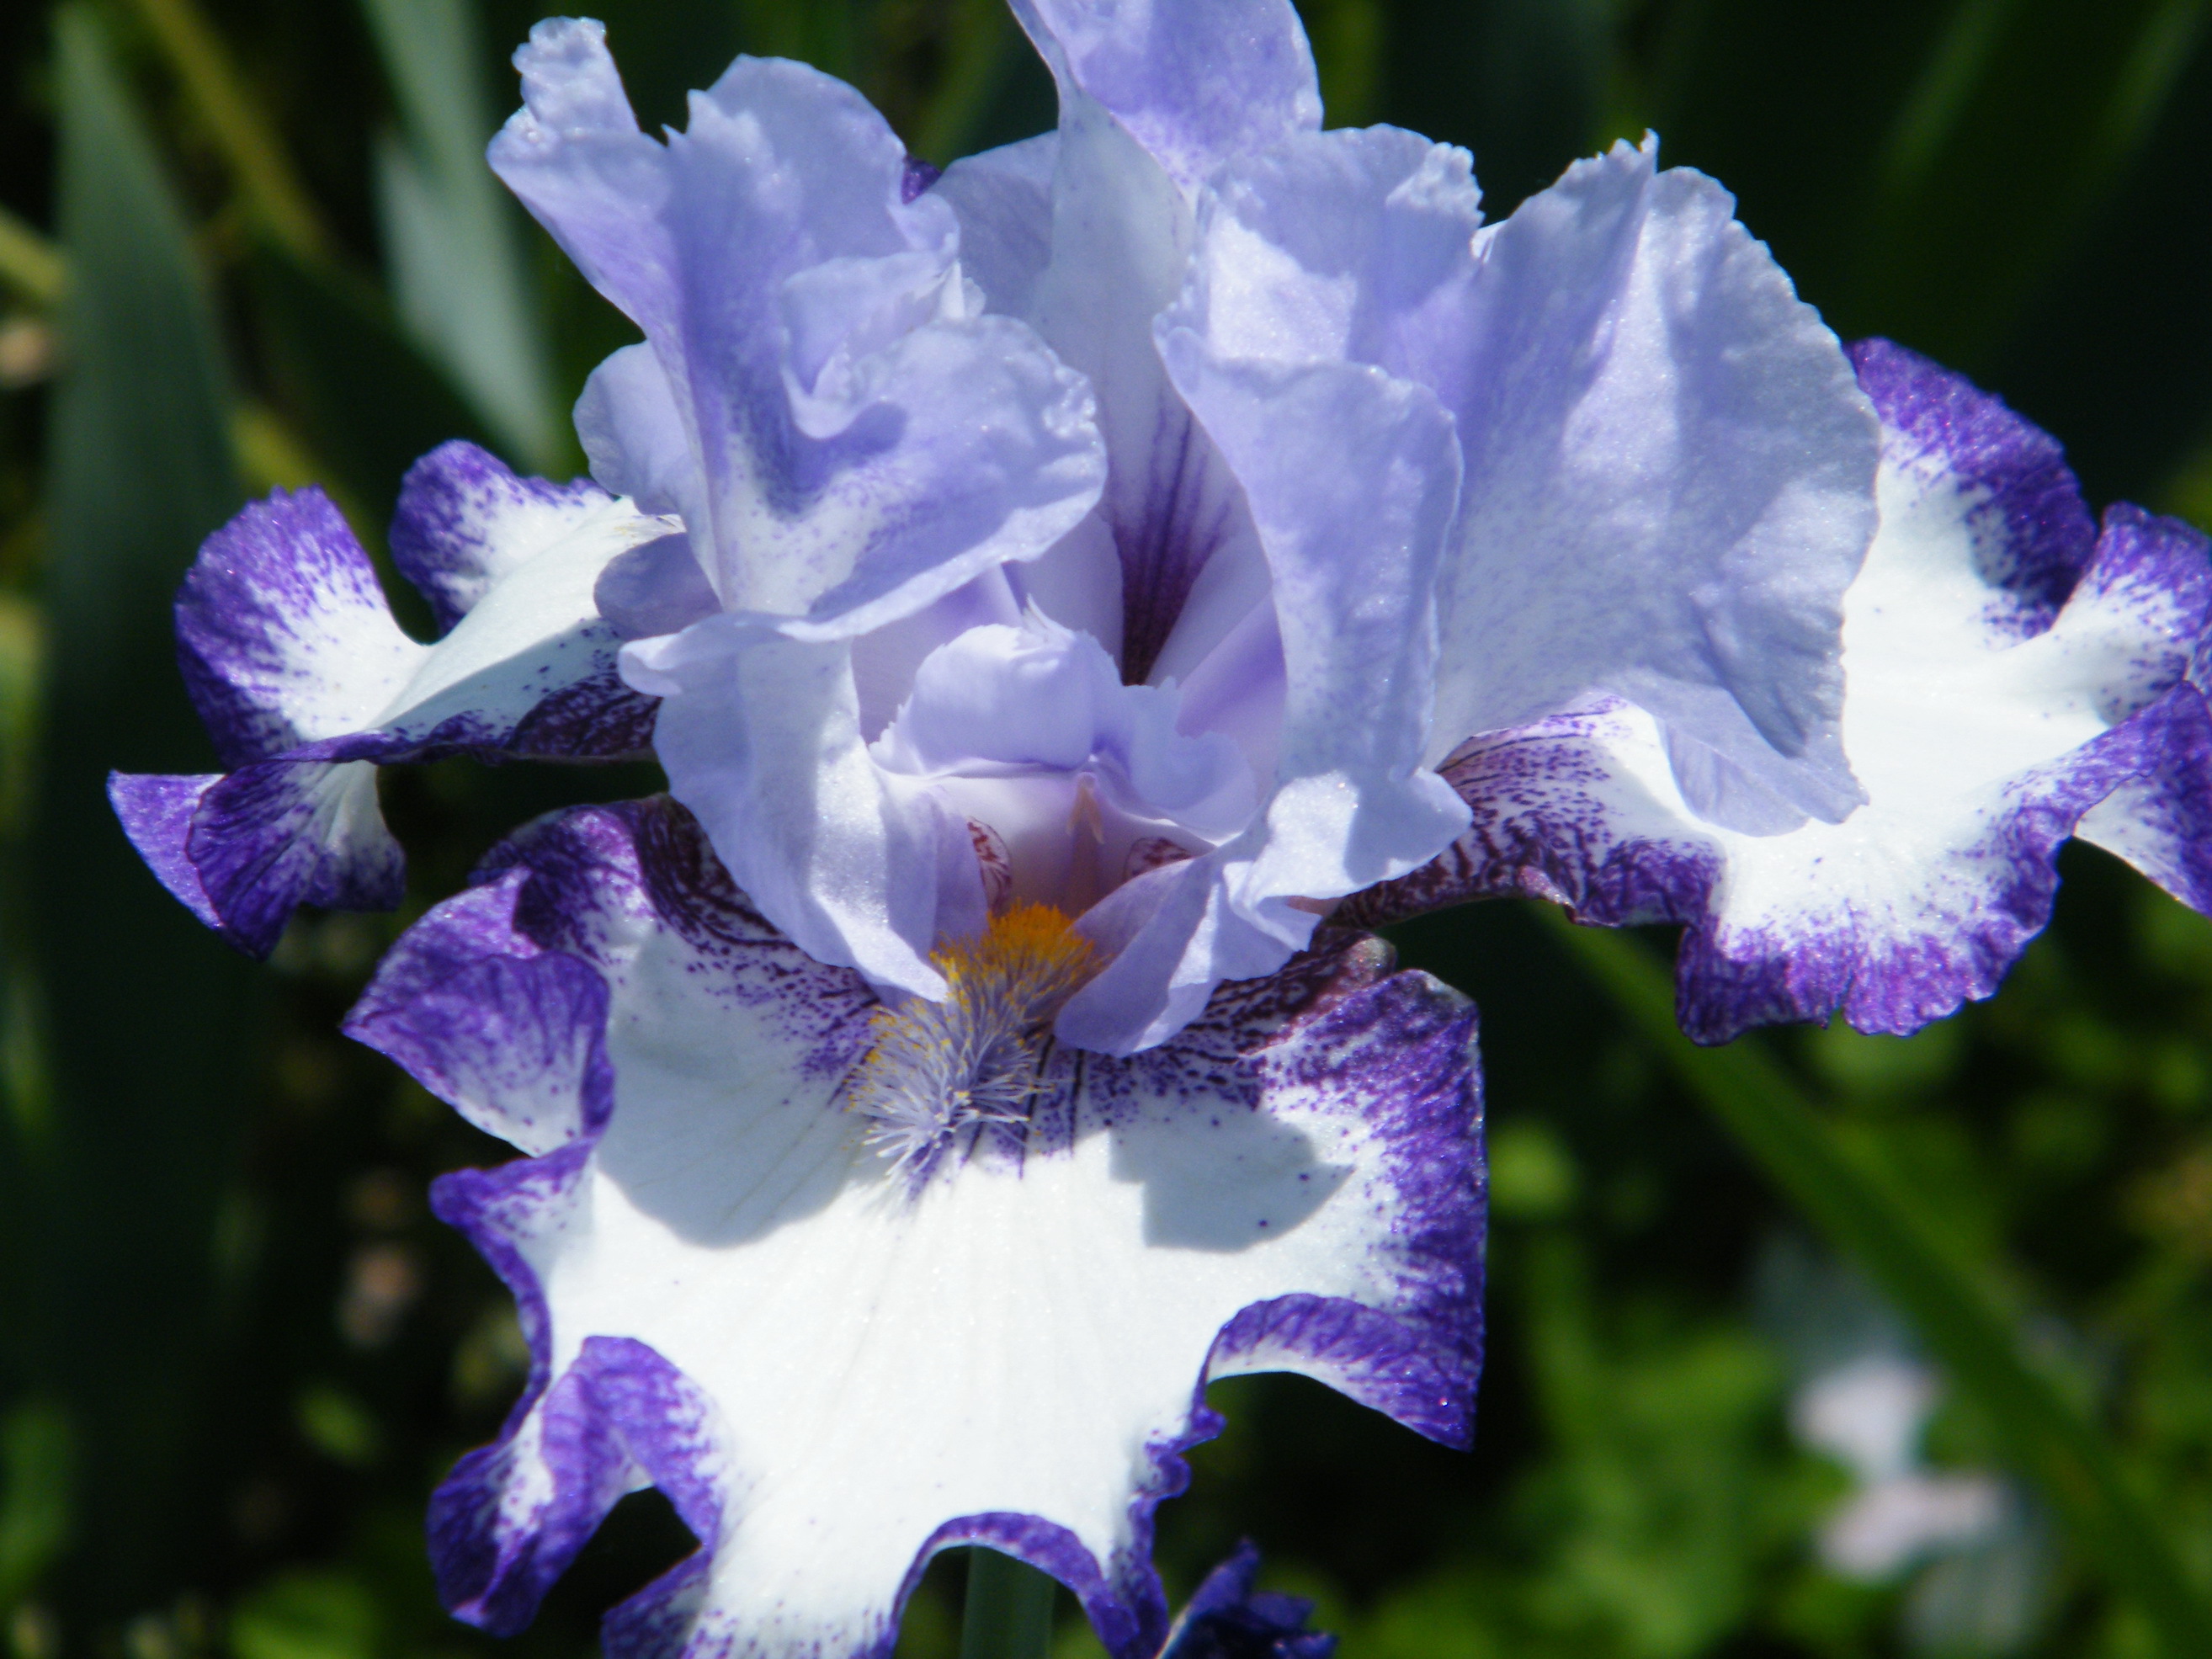 Beautiful irises at their summer cottage wallpaper